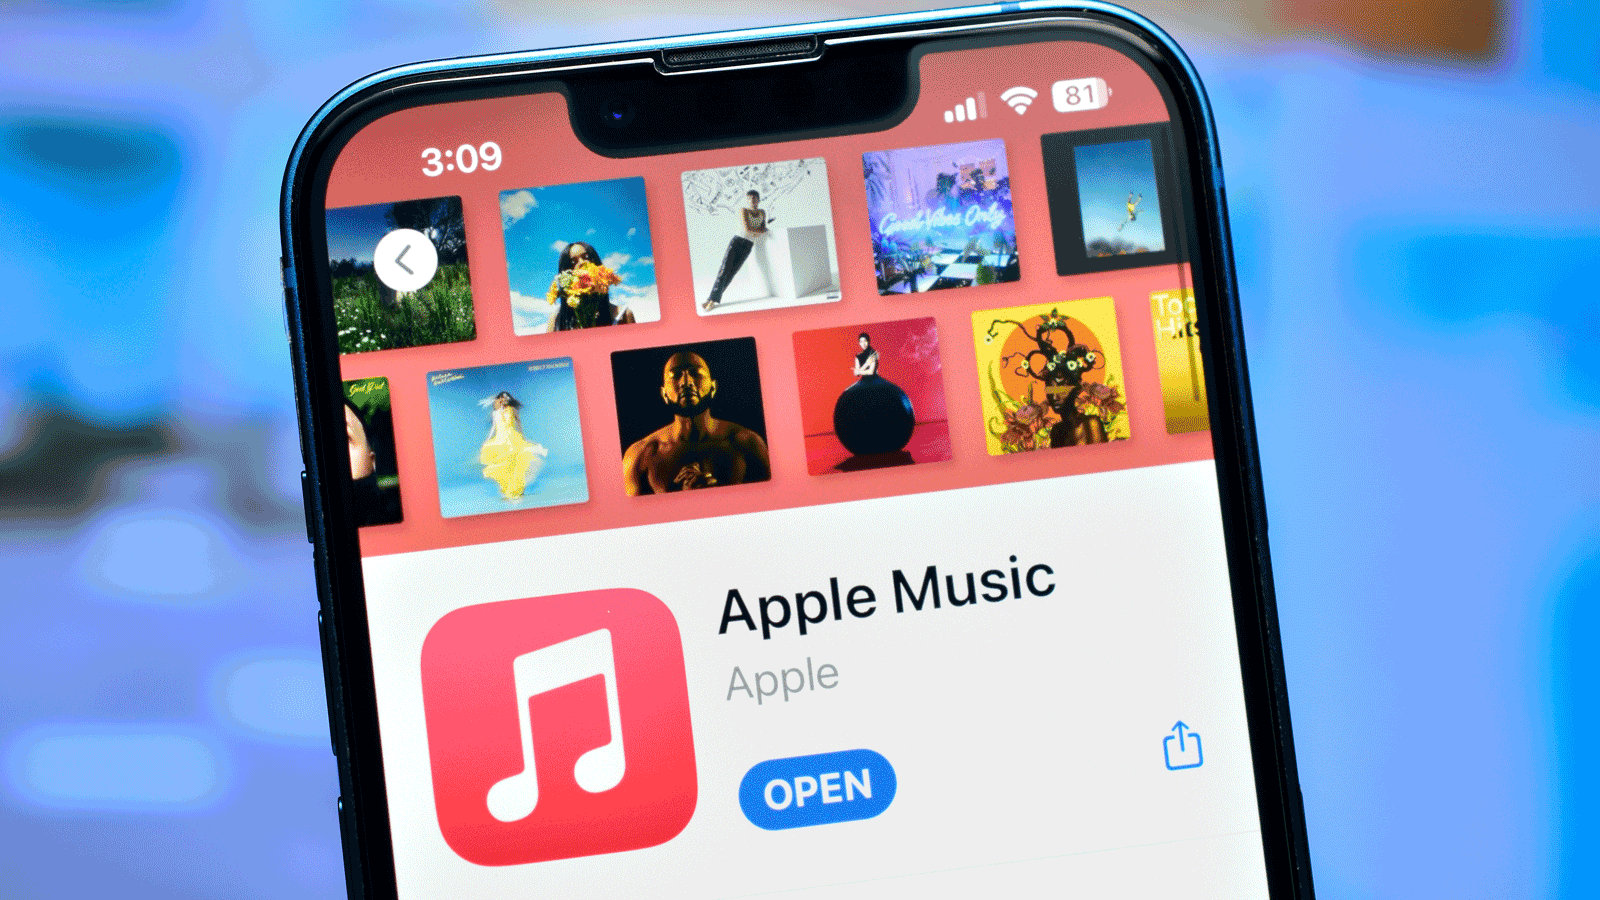 EU to levy antitrust fine against Apple for music streaming practices – report